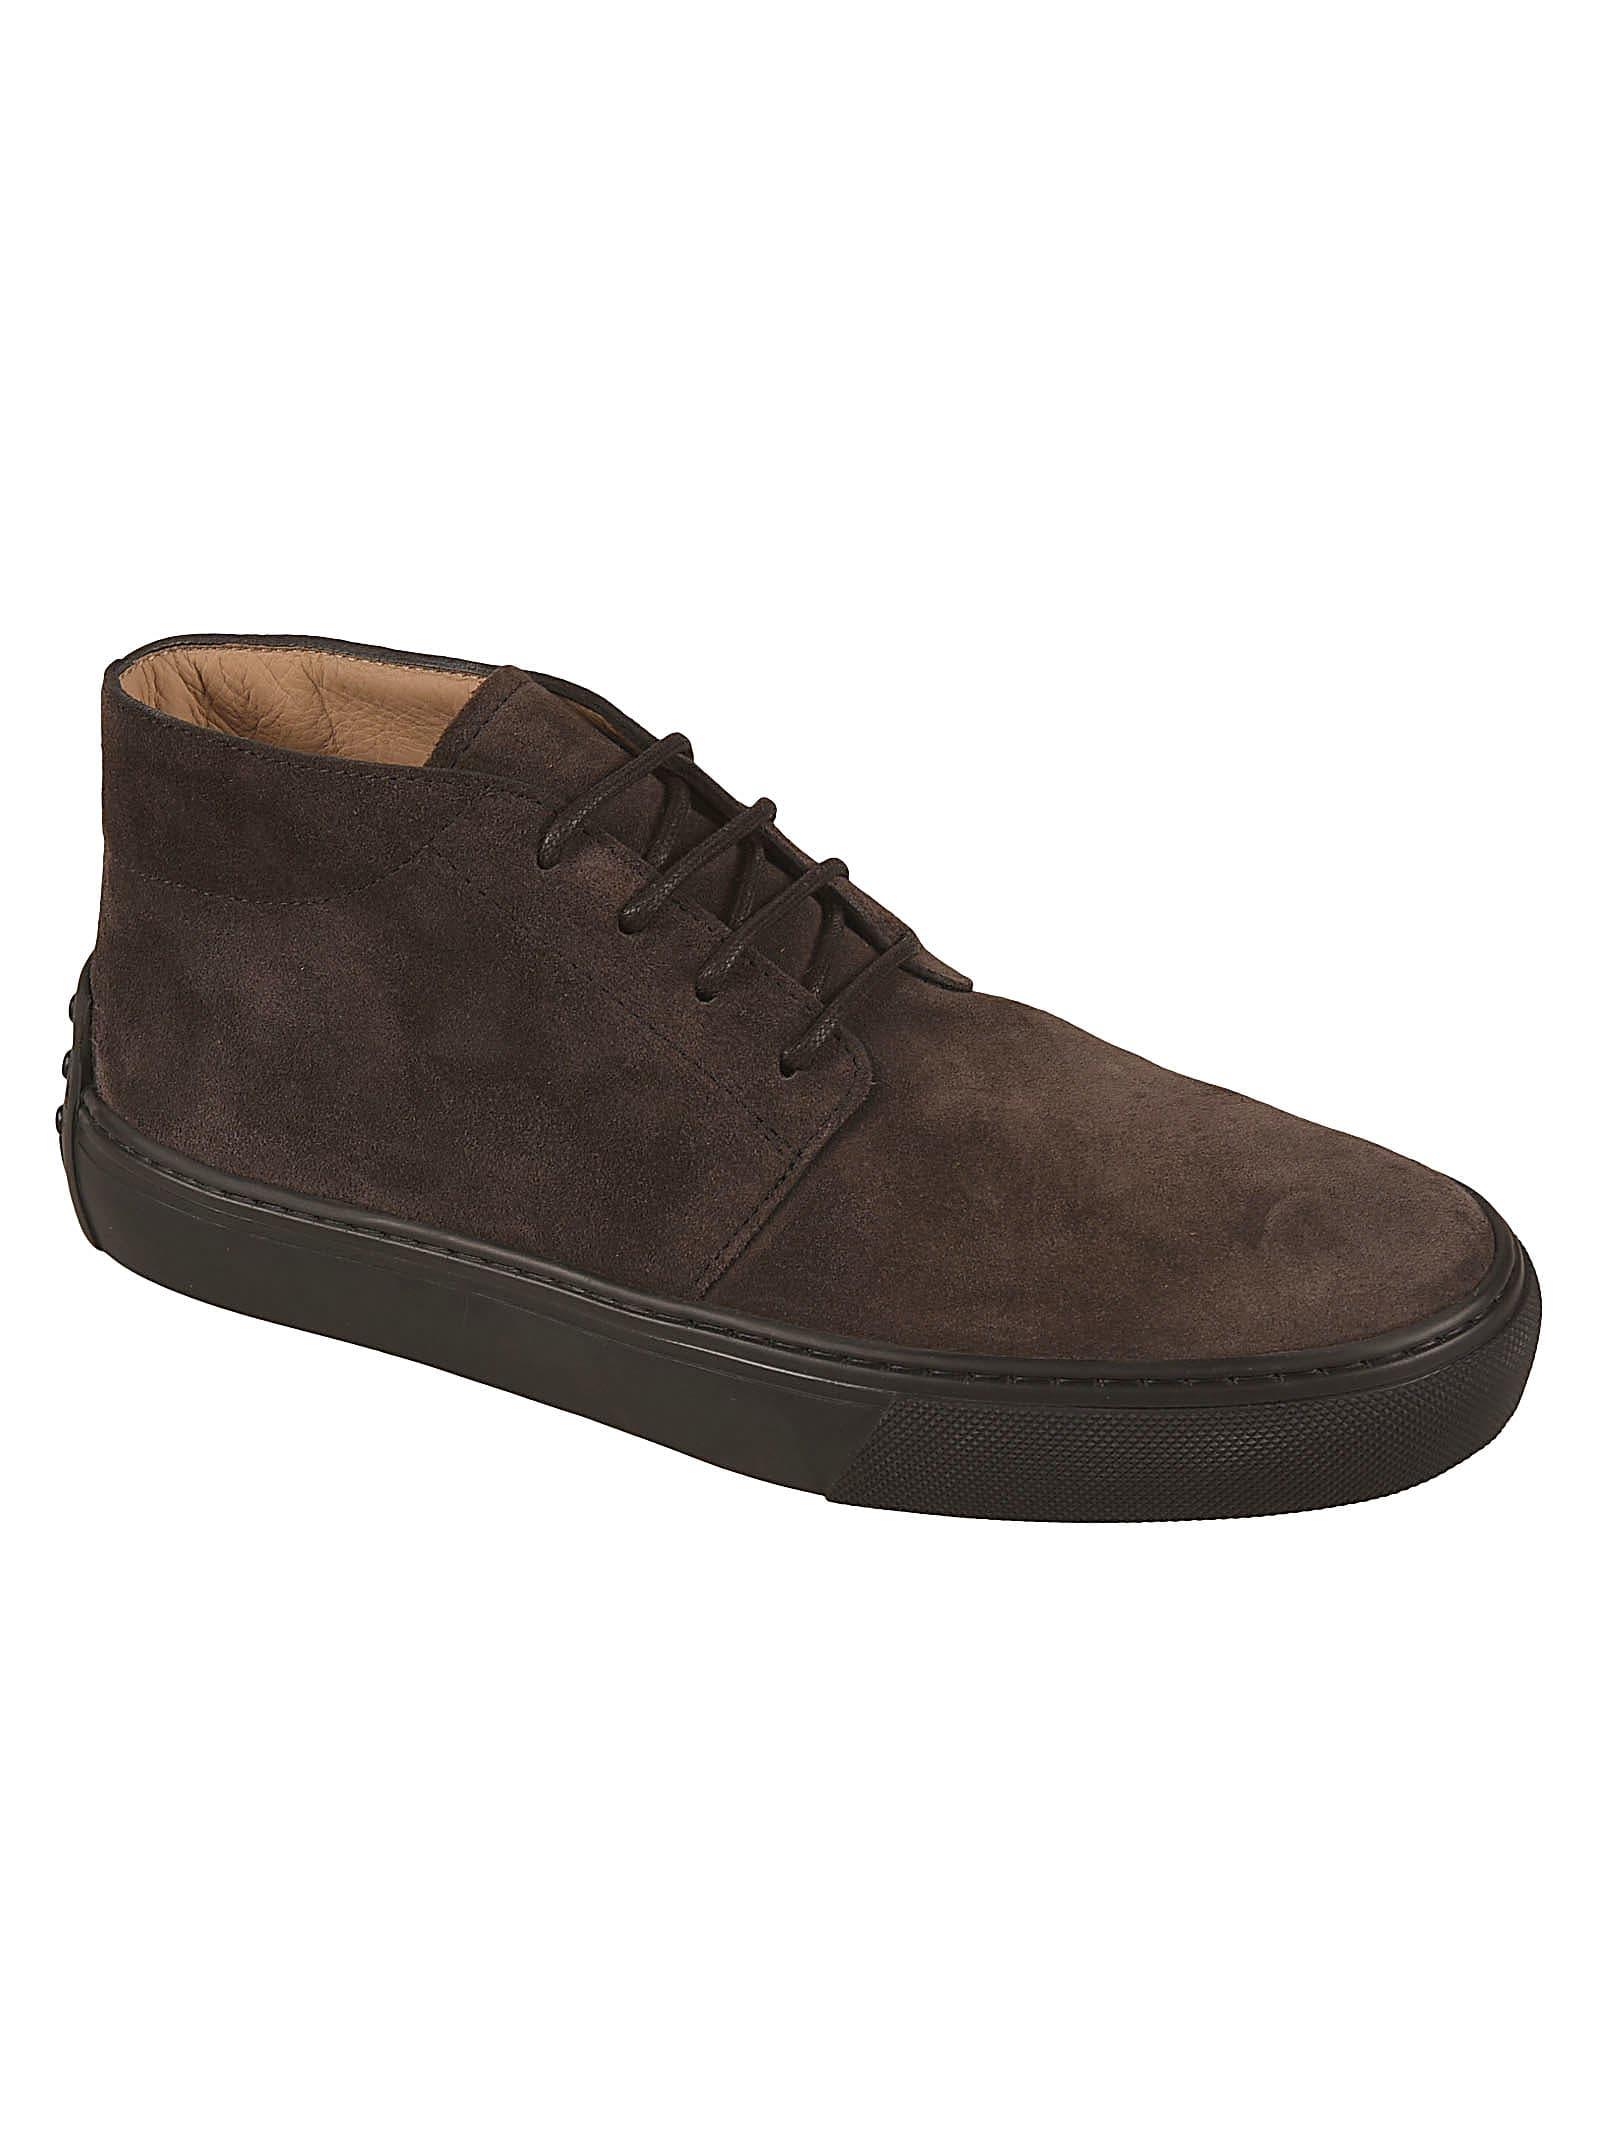 Tod's Polacco Cassetta Lace-up Boots in Brown for Men | Lyst